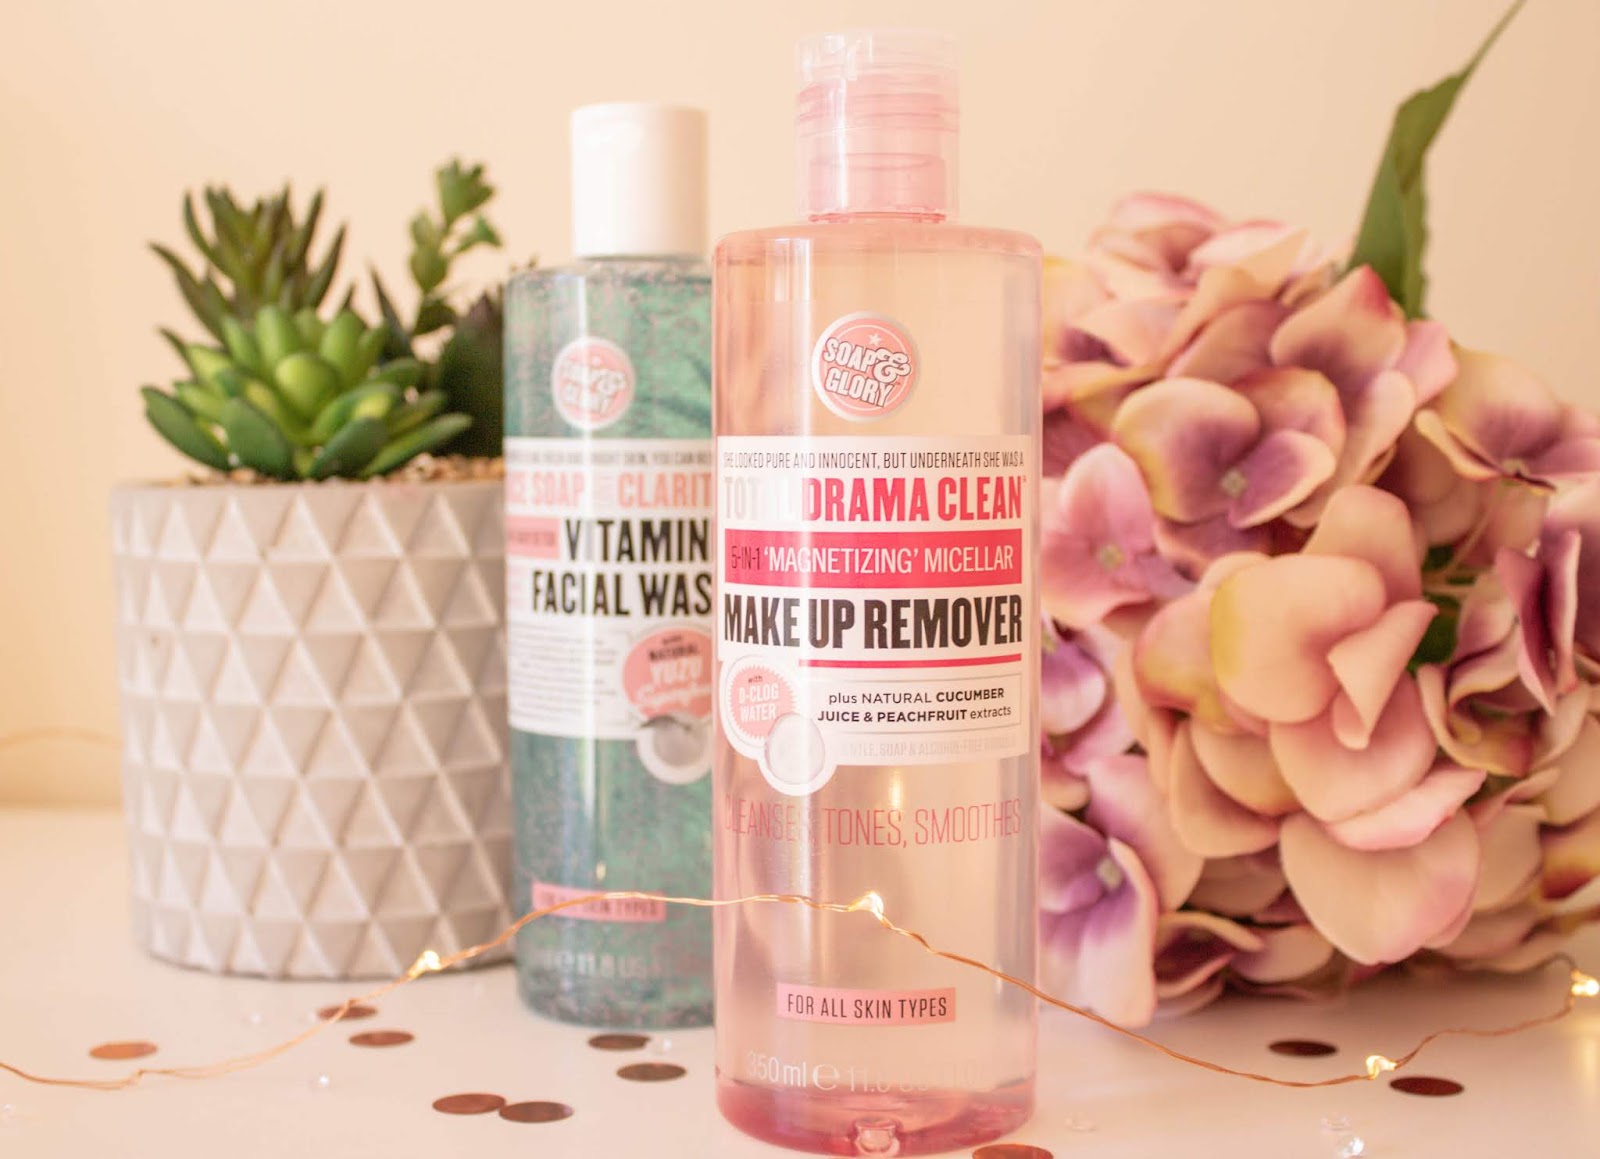 Soap And Glory Drama Clean 5-in-1 Micellar Cleansing Water